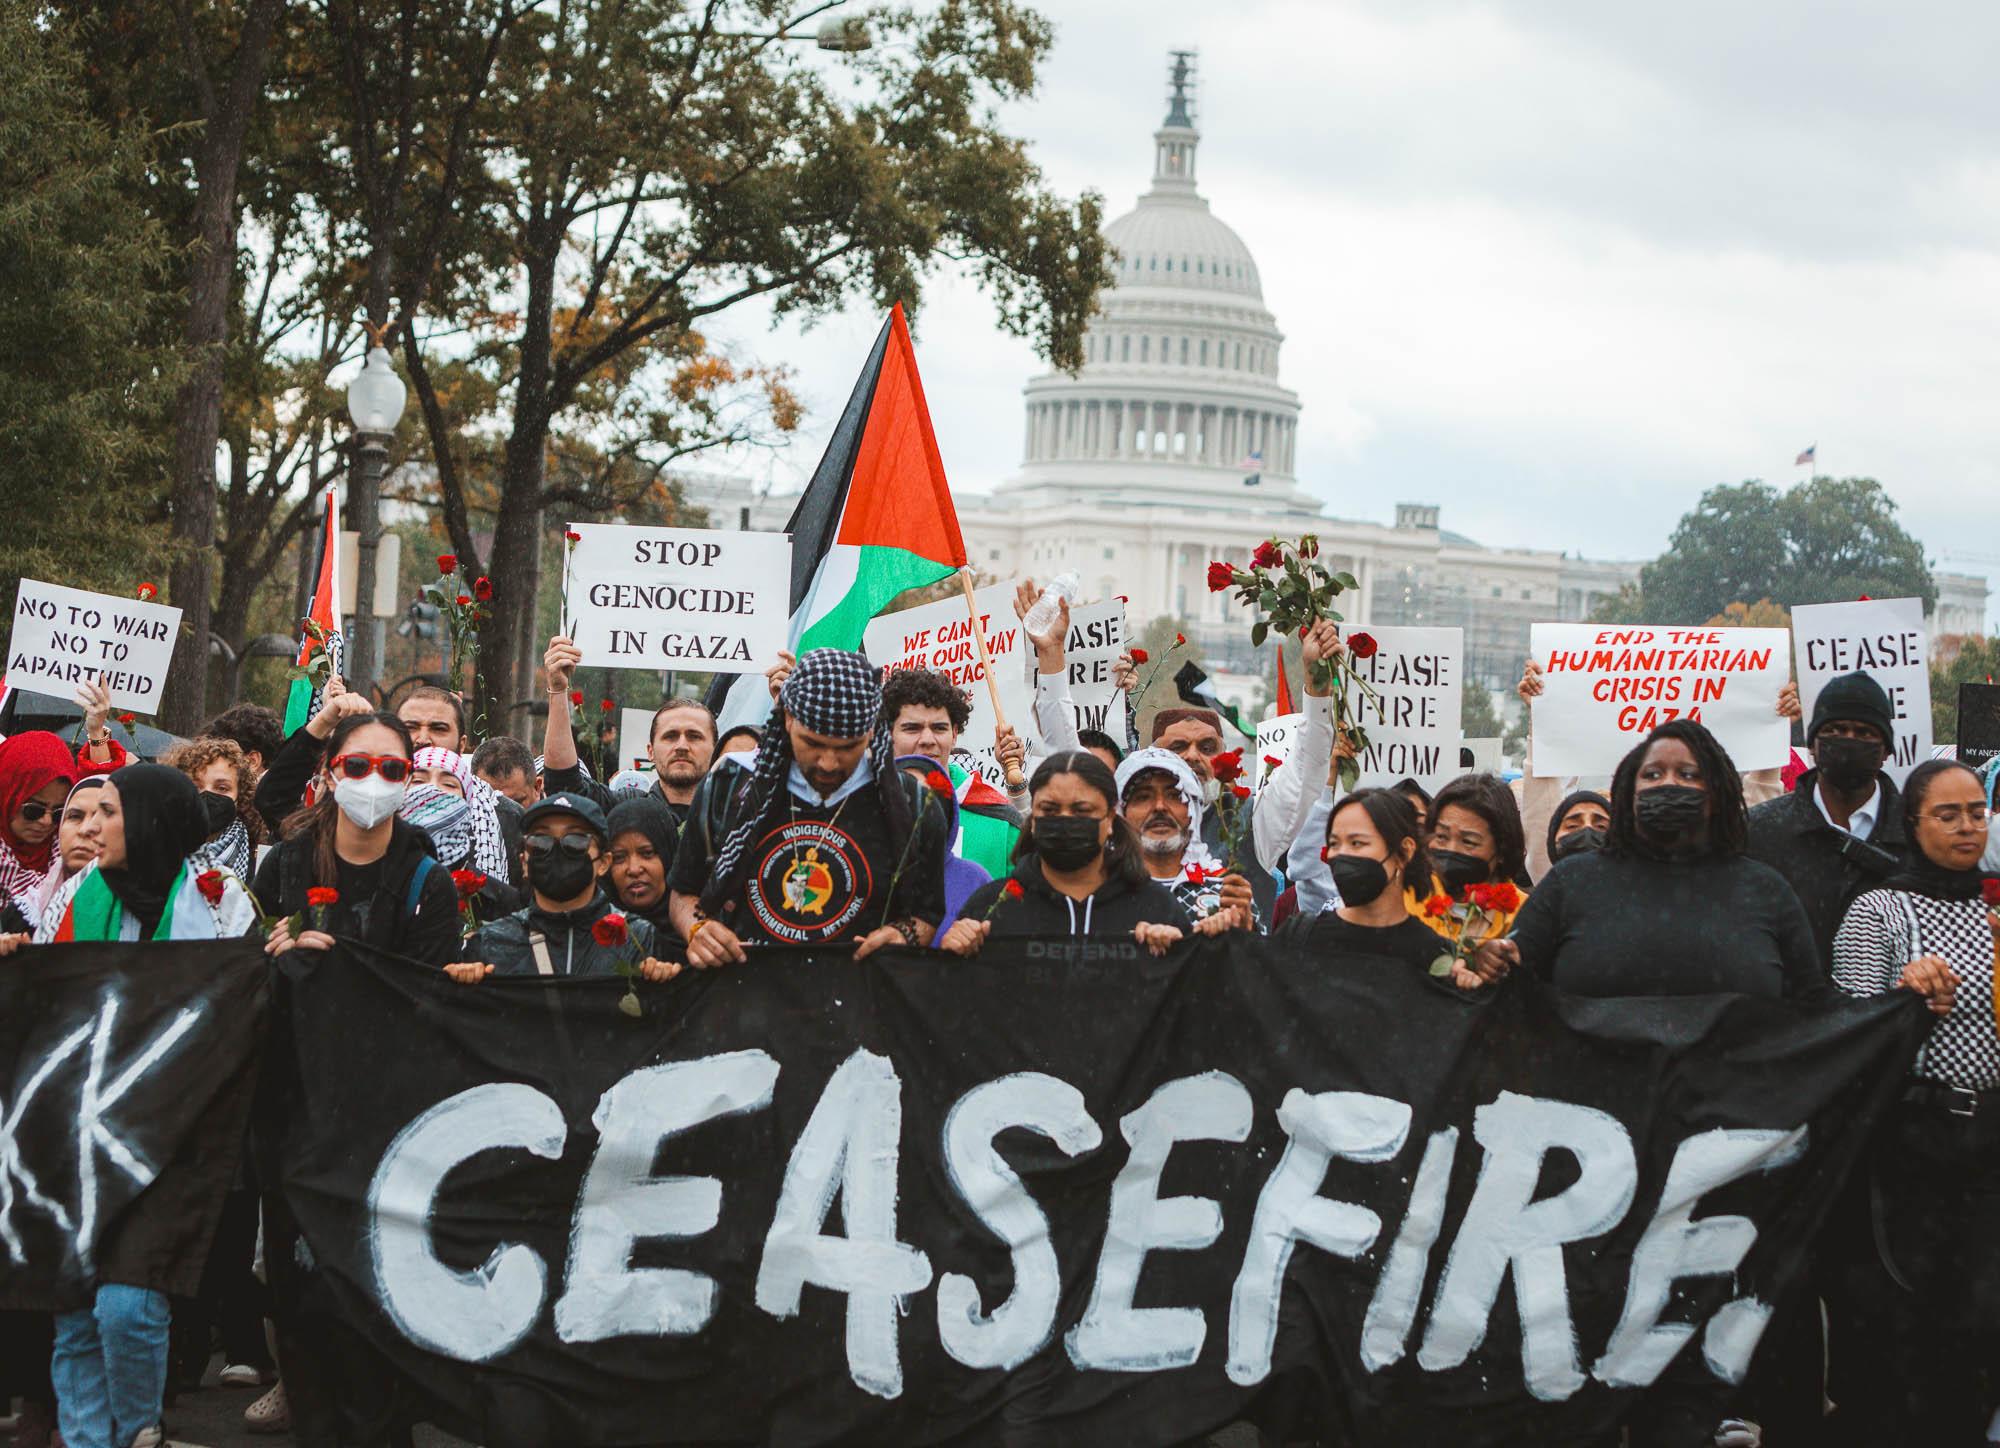 For Gaza: Ceasefire March in Washington D.C. - WASHINGTON, DC-- On Friday, October 20,...